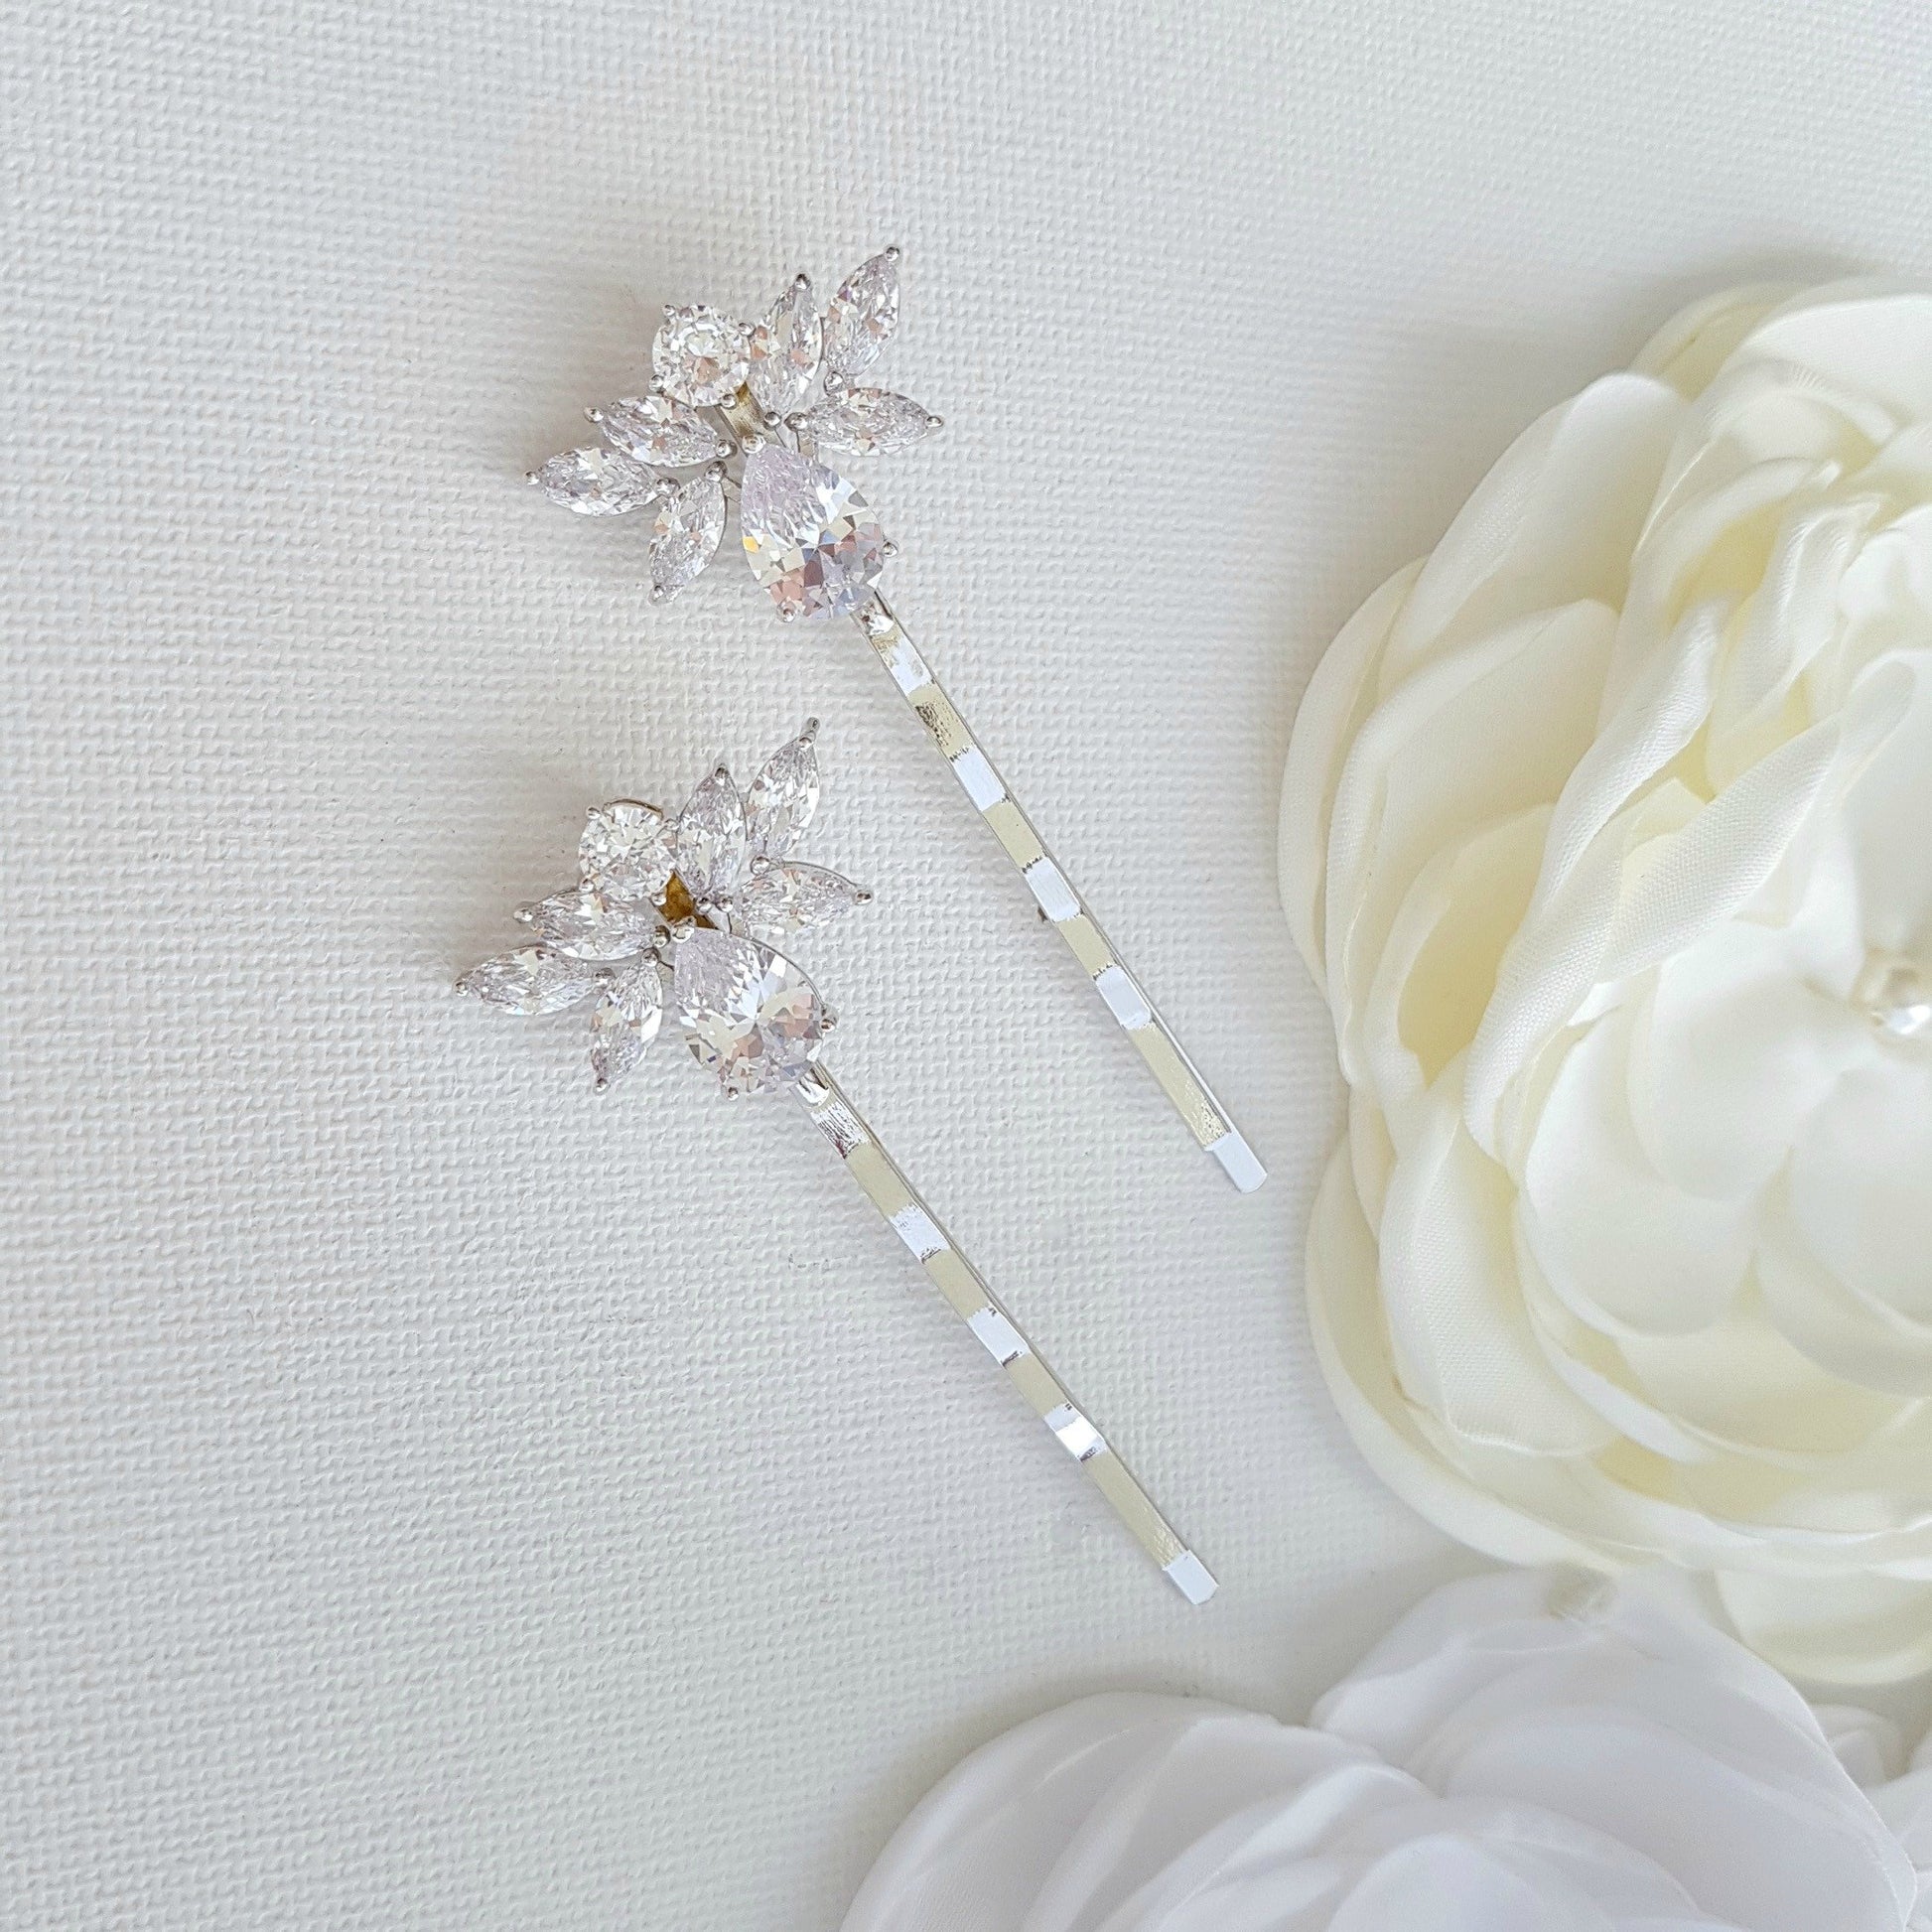 Small Rhinestone Pins for Adding Embellishment - China Brooch and